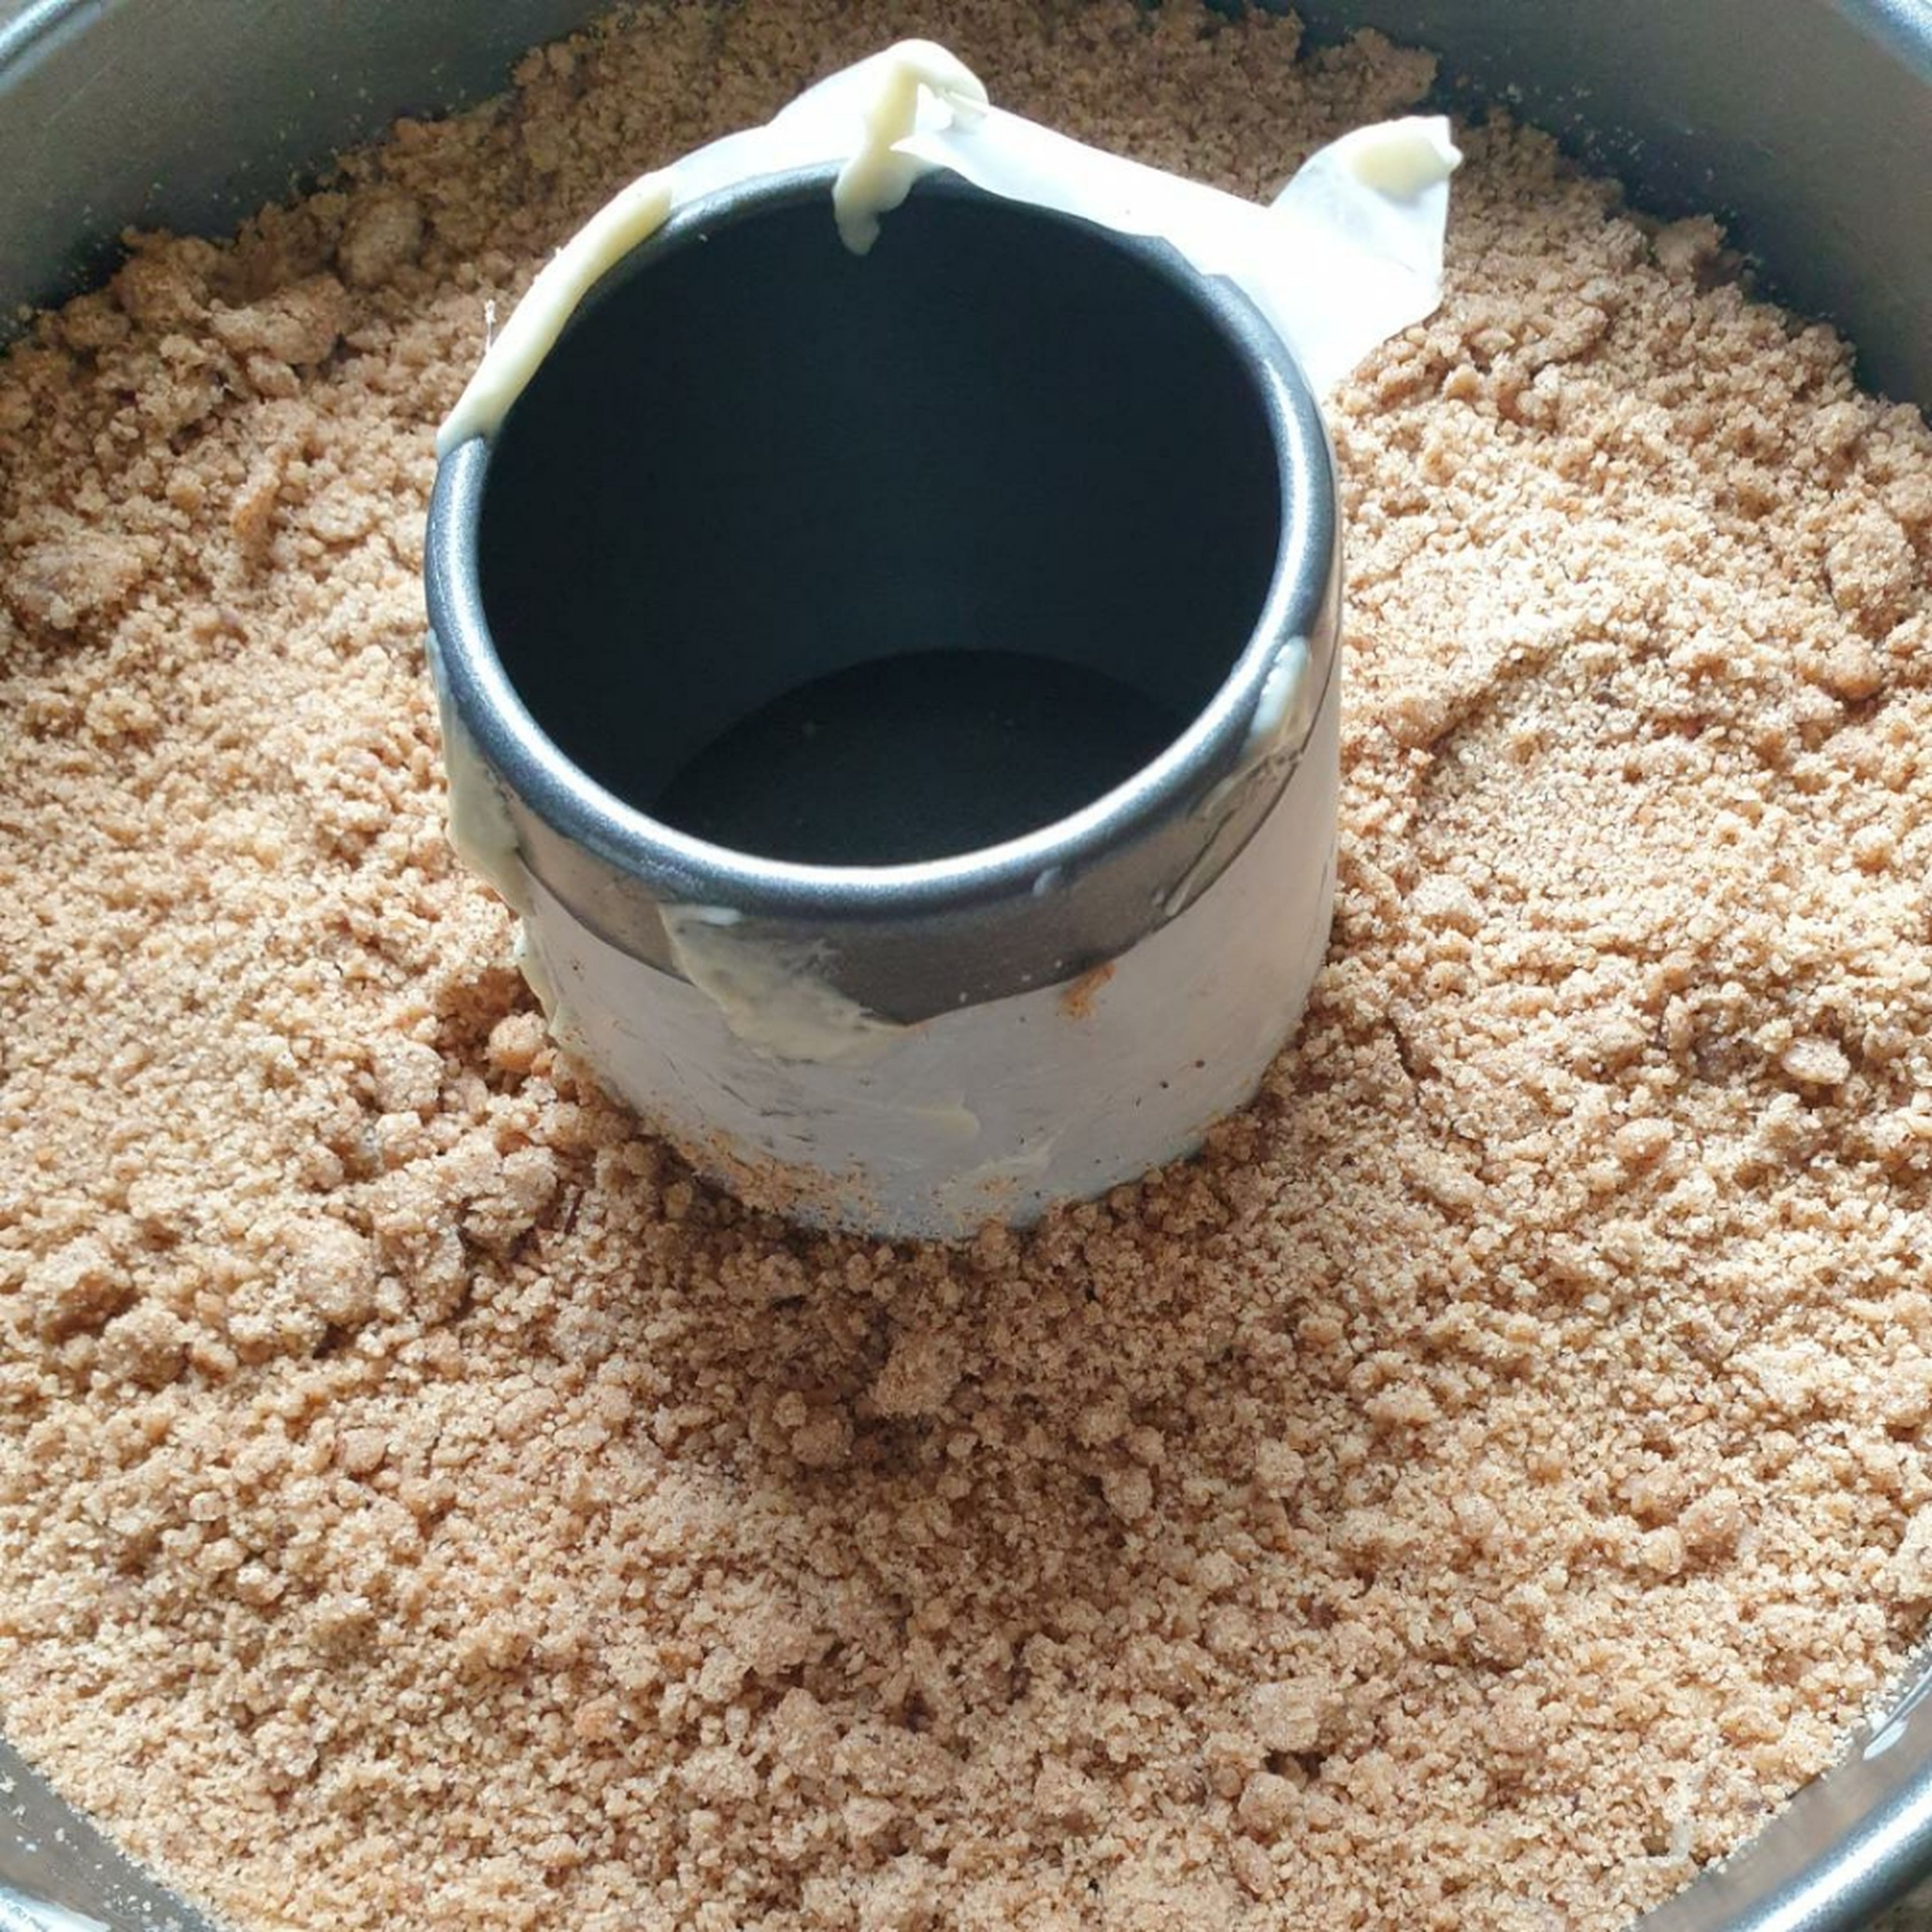 Sprinkle the prepared Streusel mixture evenly on top of the cake batter.